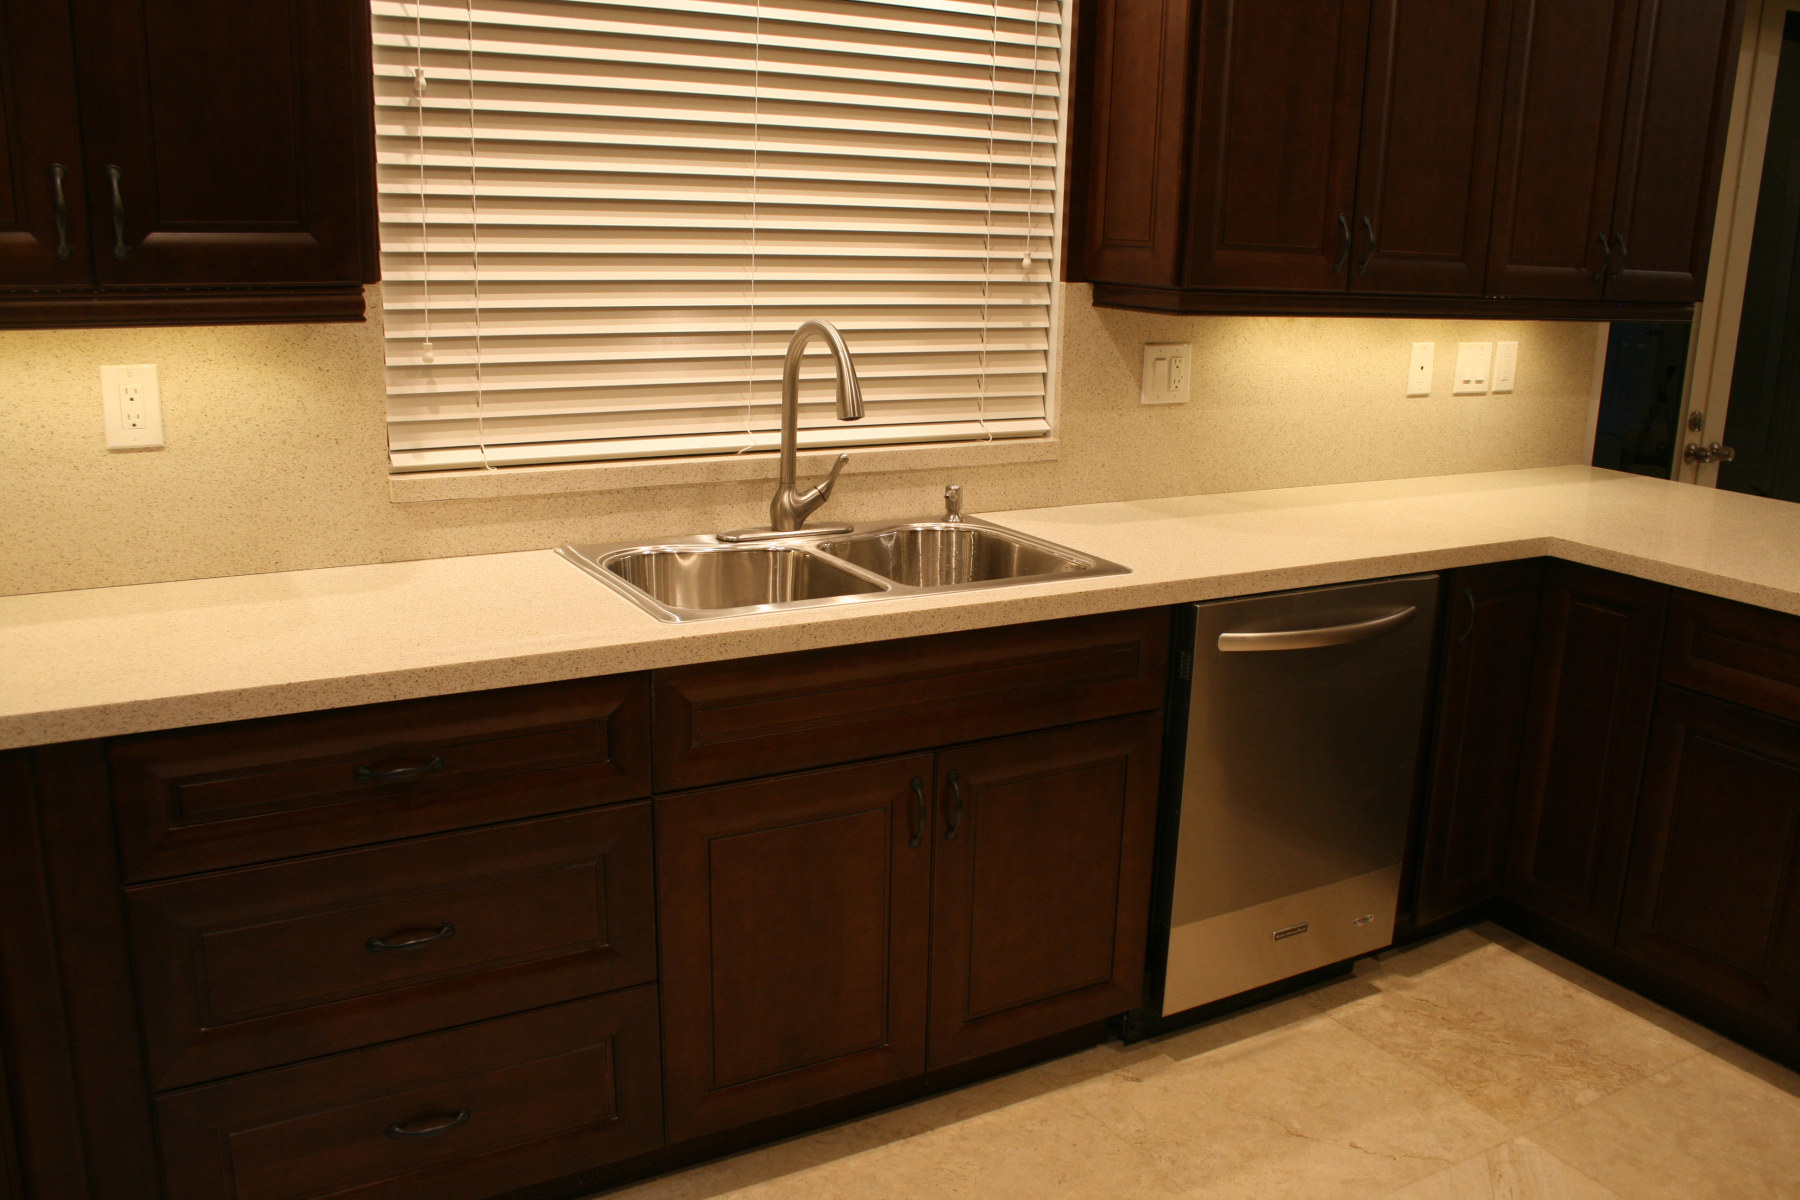 New solid wood kitchen cabinets and stainless steel dishwasher